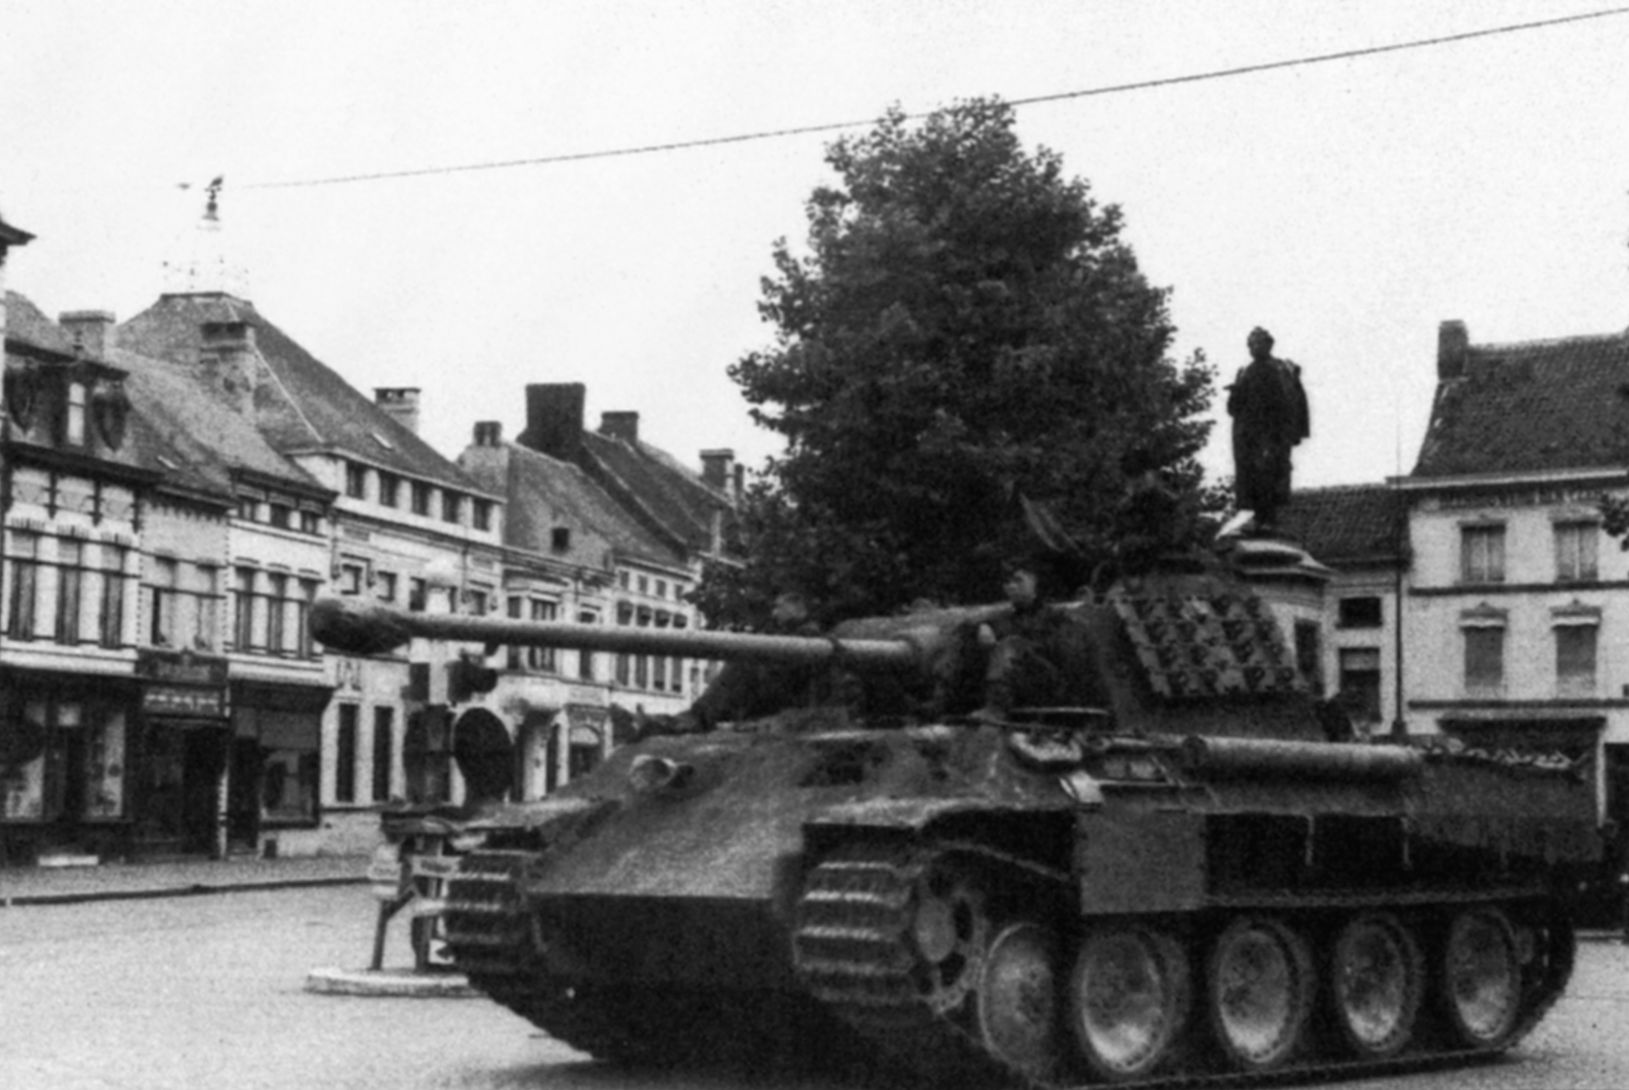 Pausing momentarily in the square of a deserted French town, a Panther medium tank and its 75mm high velocity cannon present a menacing profile. The Panther was designed by German engineers in response to the hugely successful Soviet T-34. (National Archives)